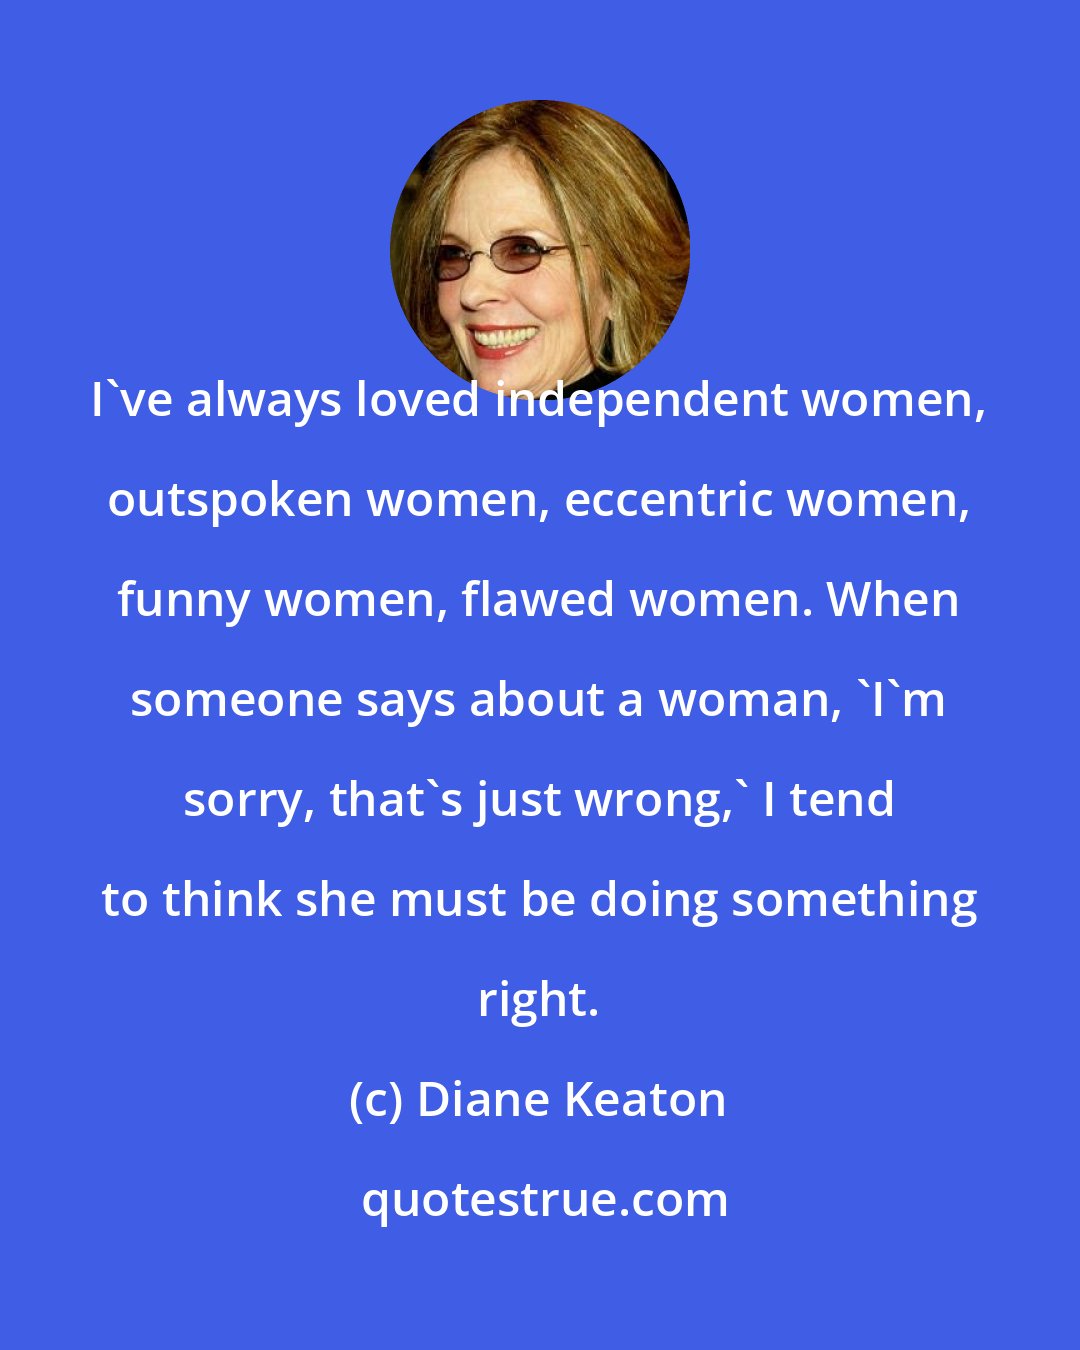 Diane Keaton: I've always loved independent women, outspoken women, eccentric women, funny women, flawed women. When someone says about a woman, 'I'm sorry, that's just wrong,' I tend to think she must be doing something right.